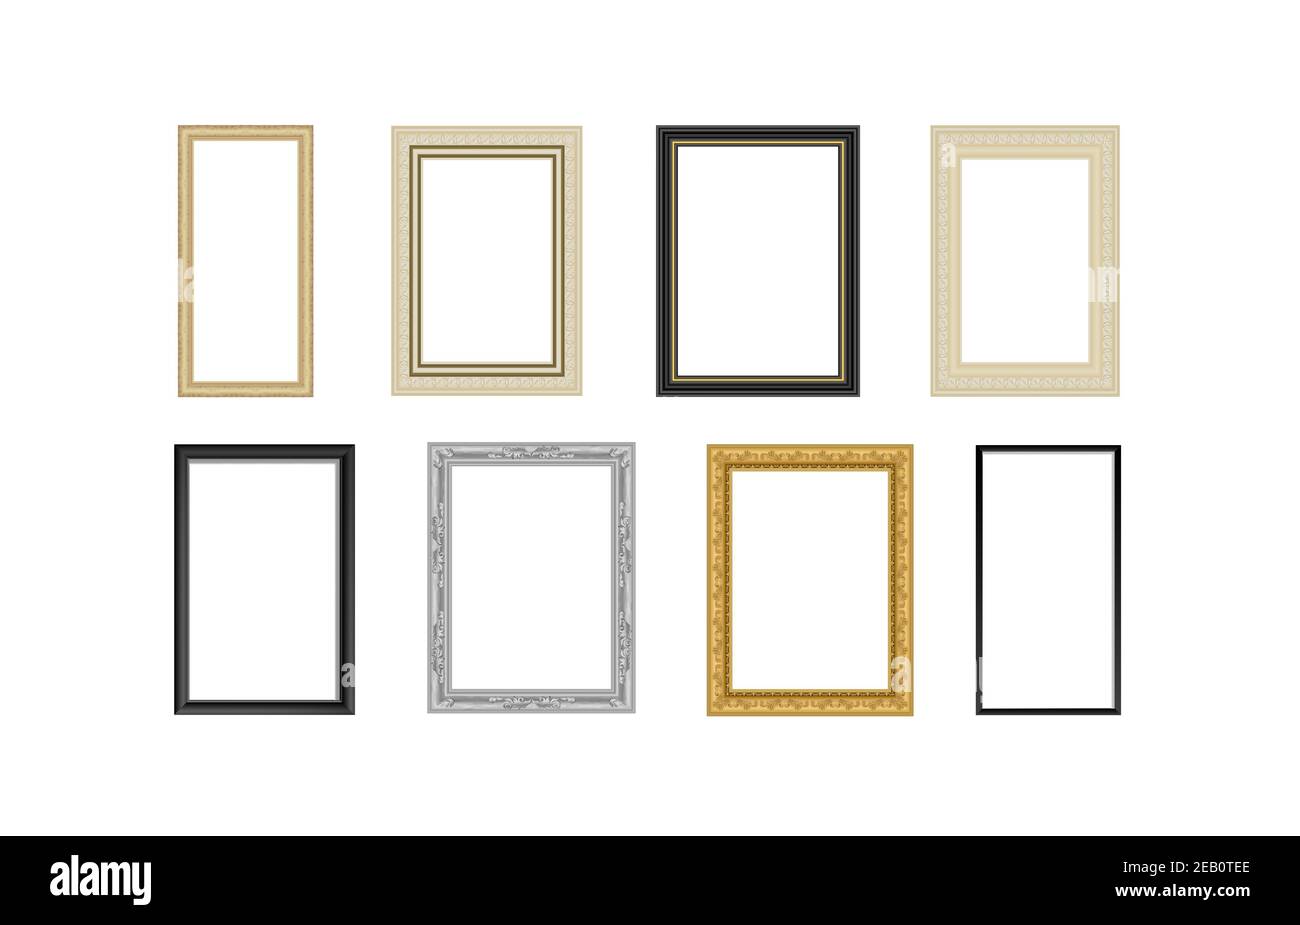 Decorative vintage frames and borders set. Gold photo frame with corner Thailand line for picture. Stock Vector